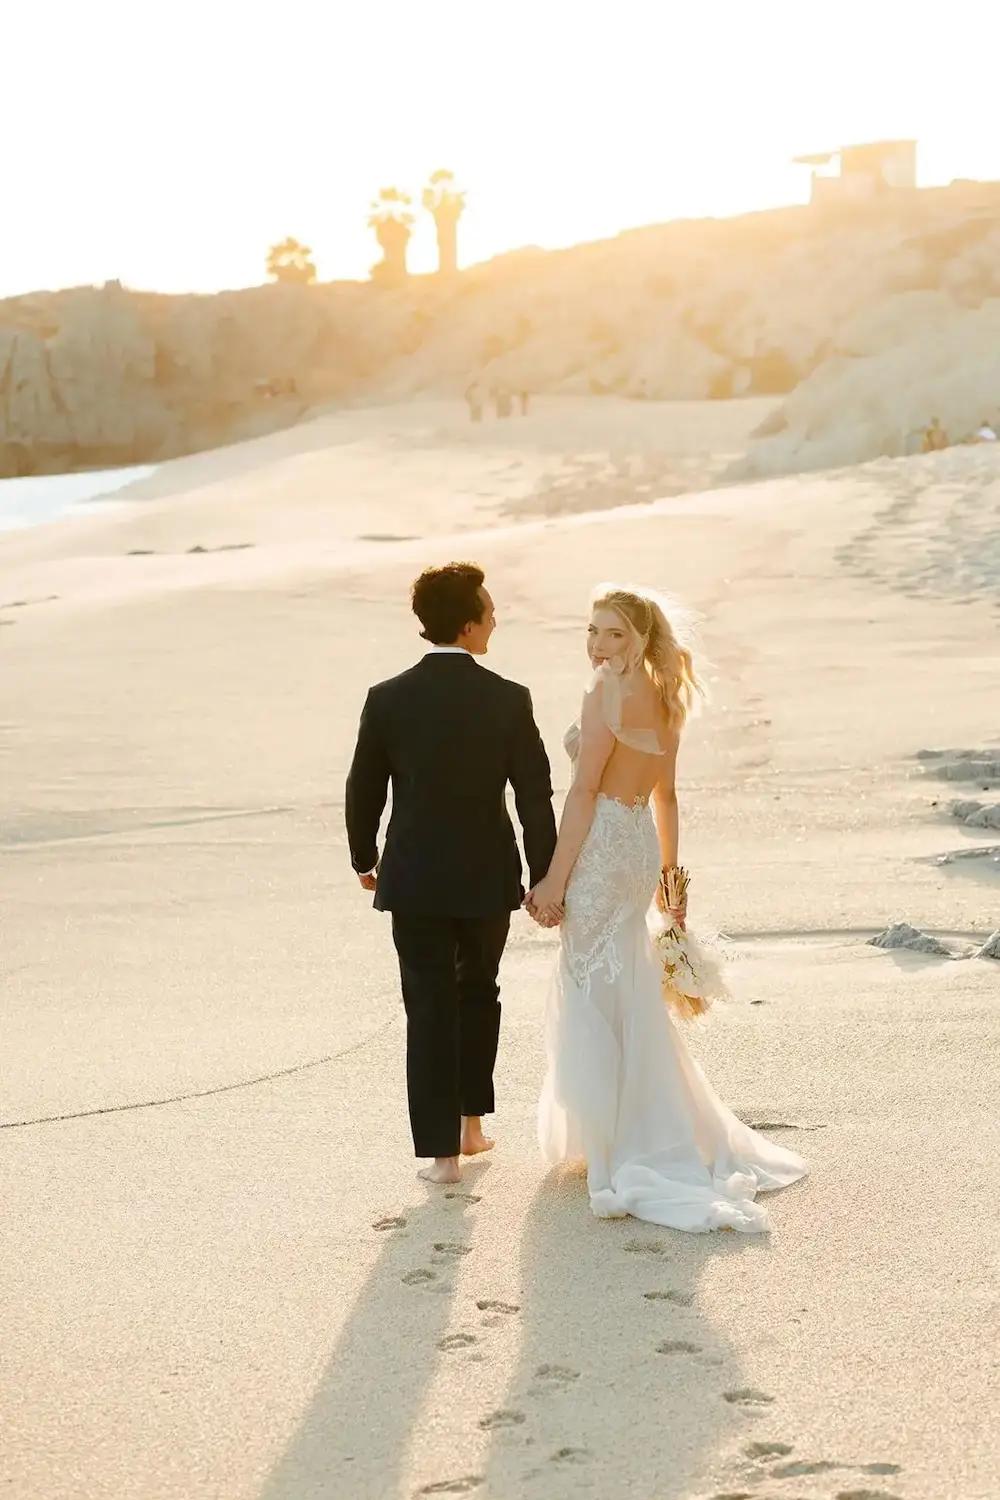 Erica Wears Lace Fit &amp; Flare Bridal Dress for Destination Beach Wedding in Cabo Image